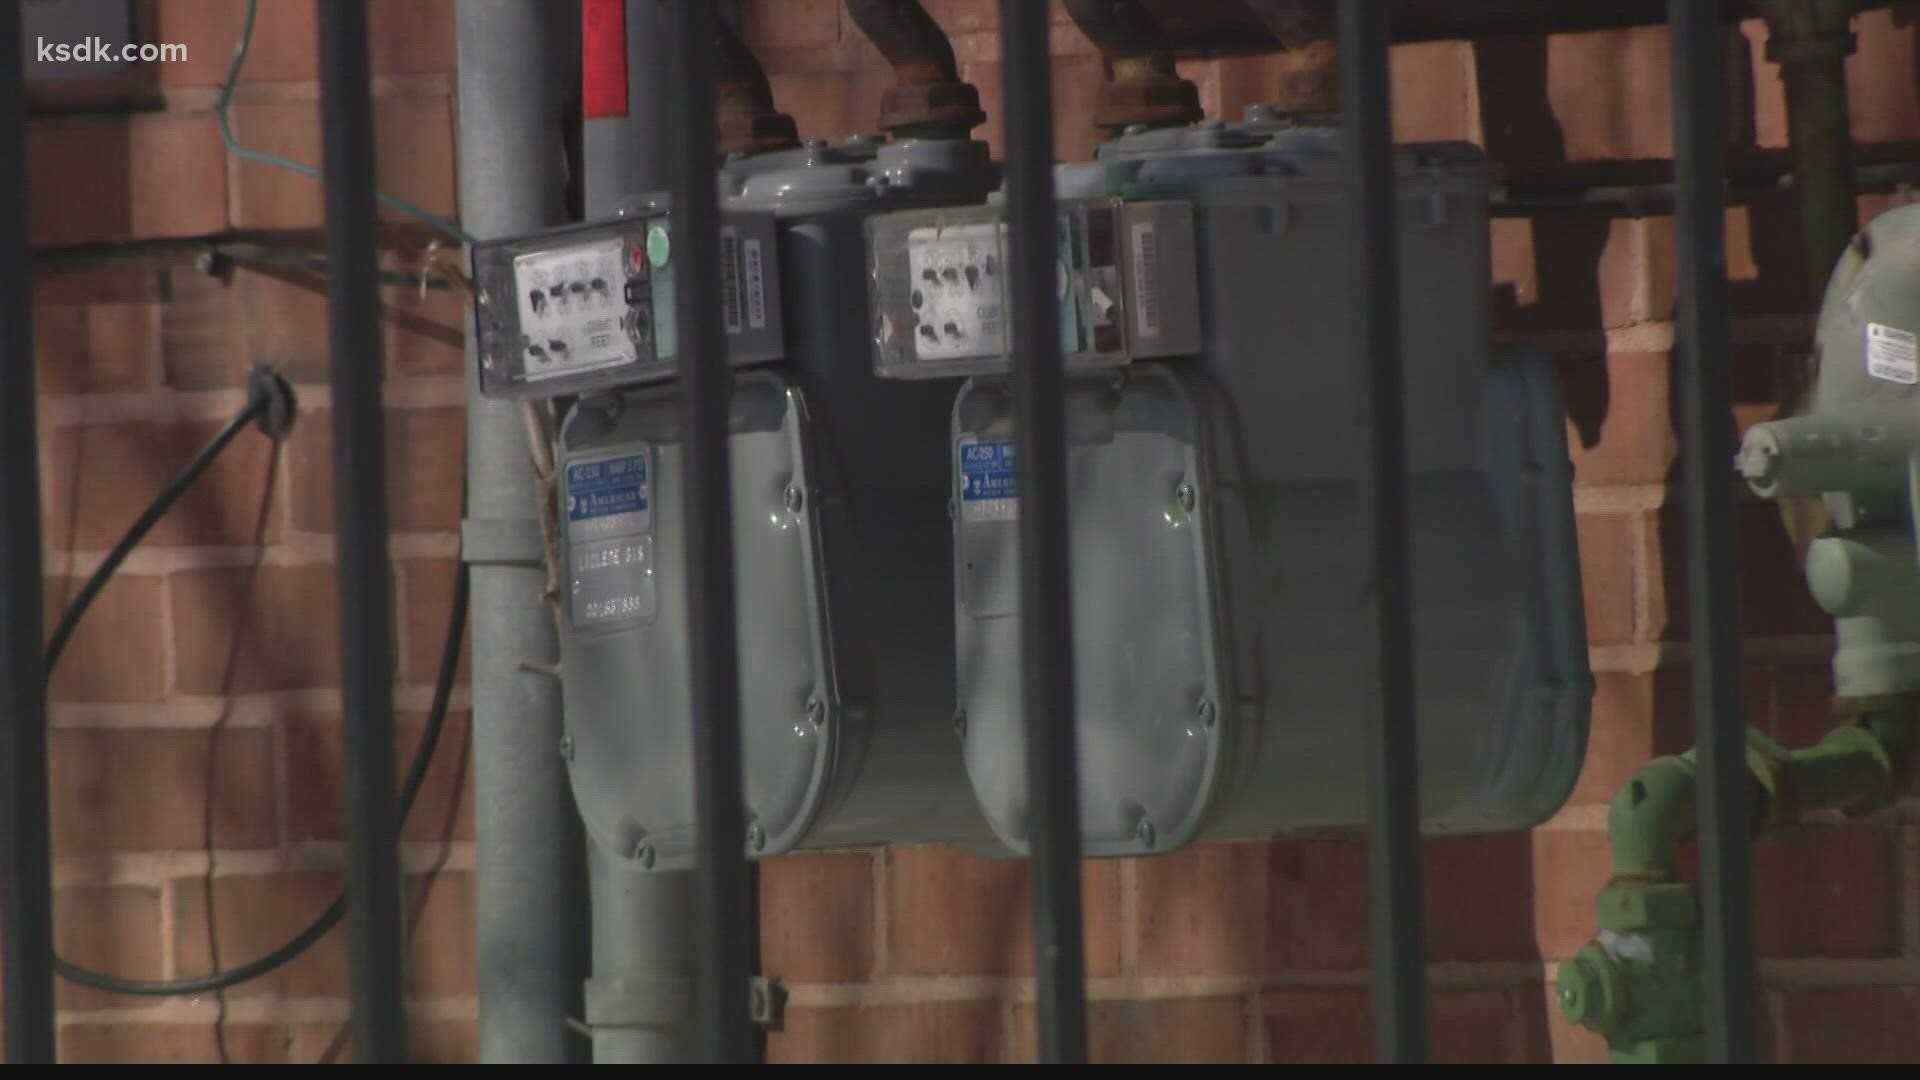 Scammers are trying to take advantage as the company upgrades its electric meters to new smart meters.